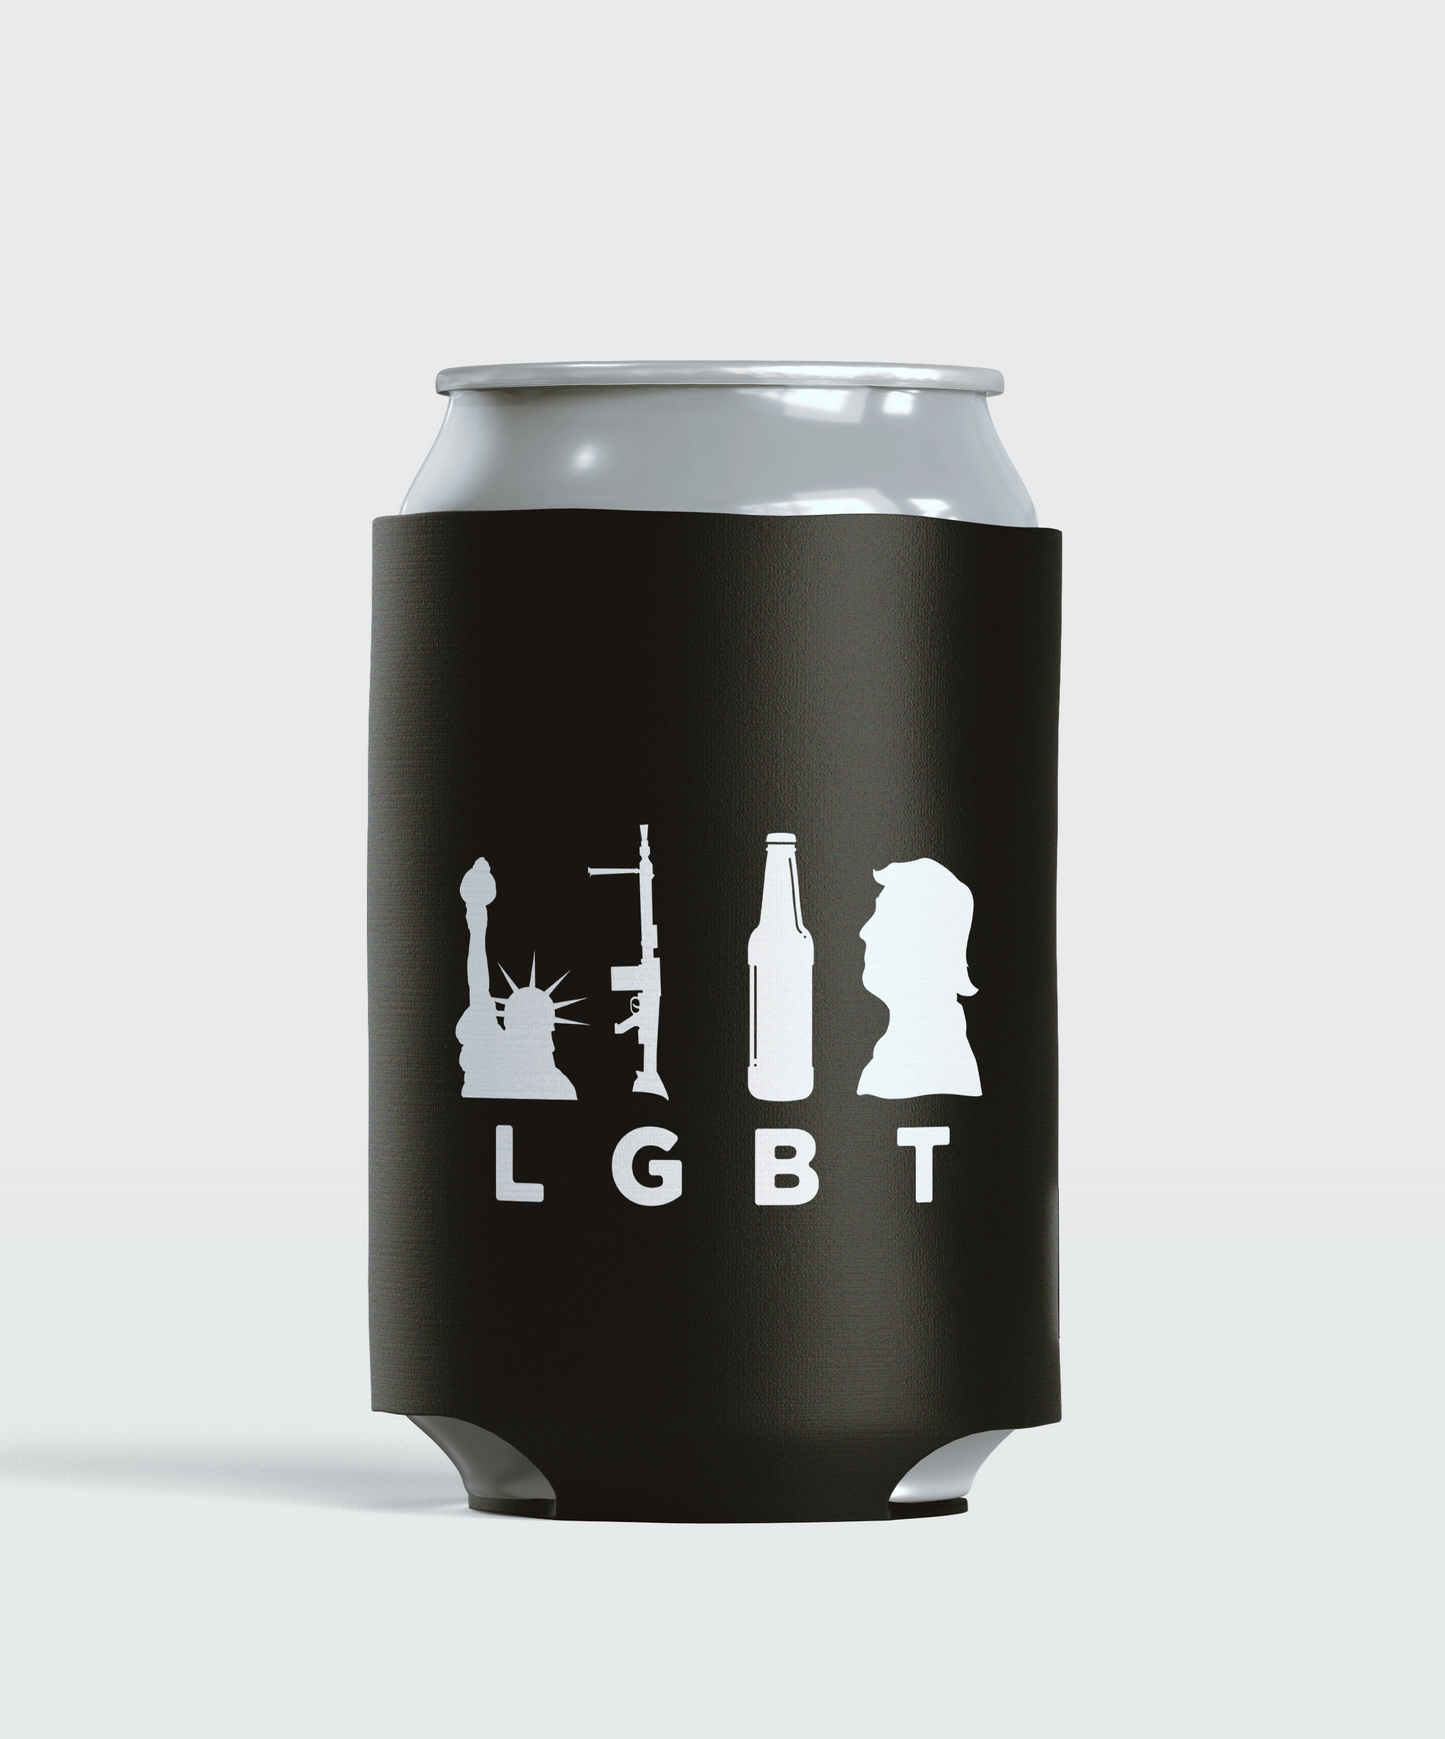 4-Pack Funny Political Can Coolers